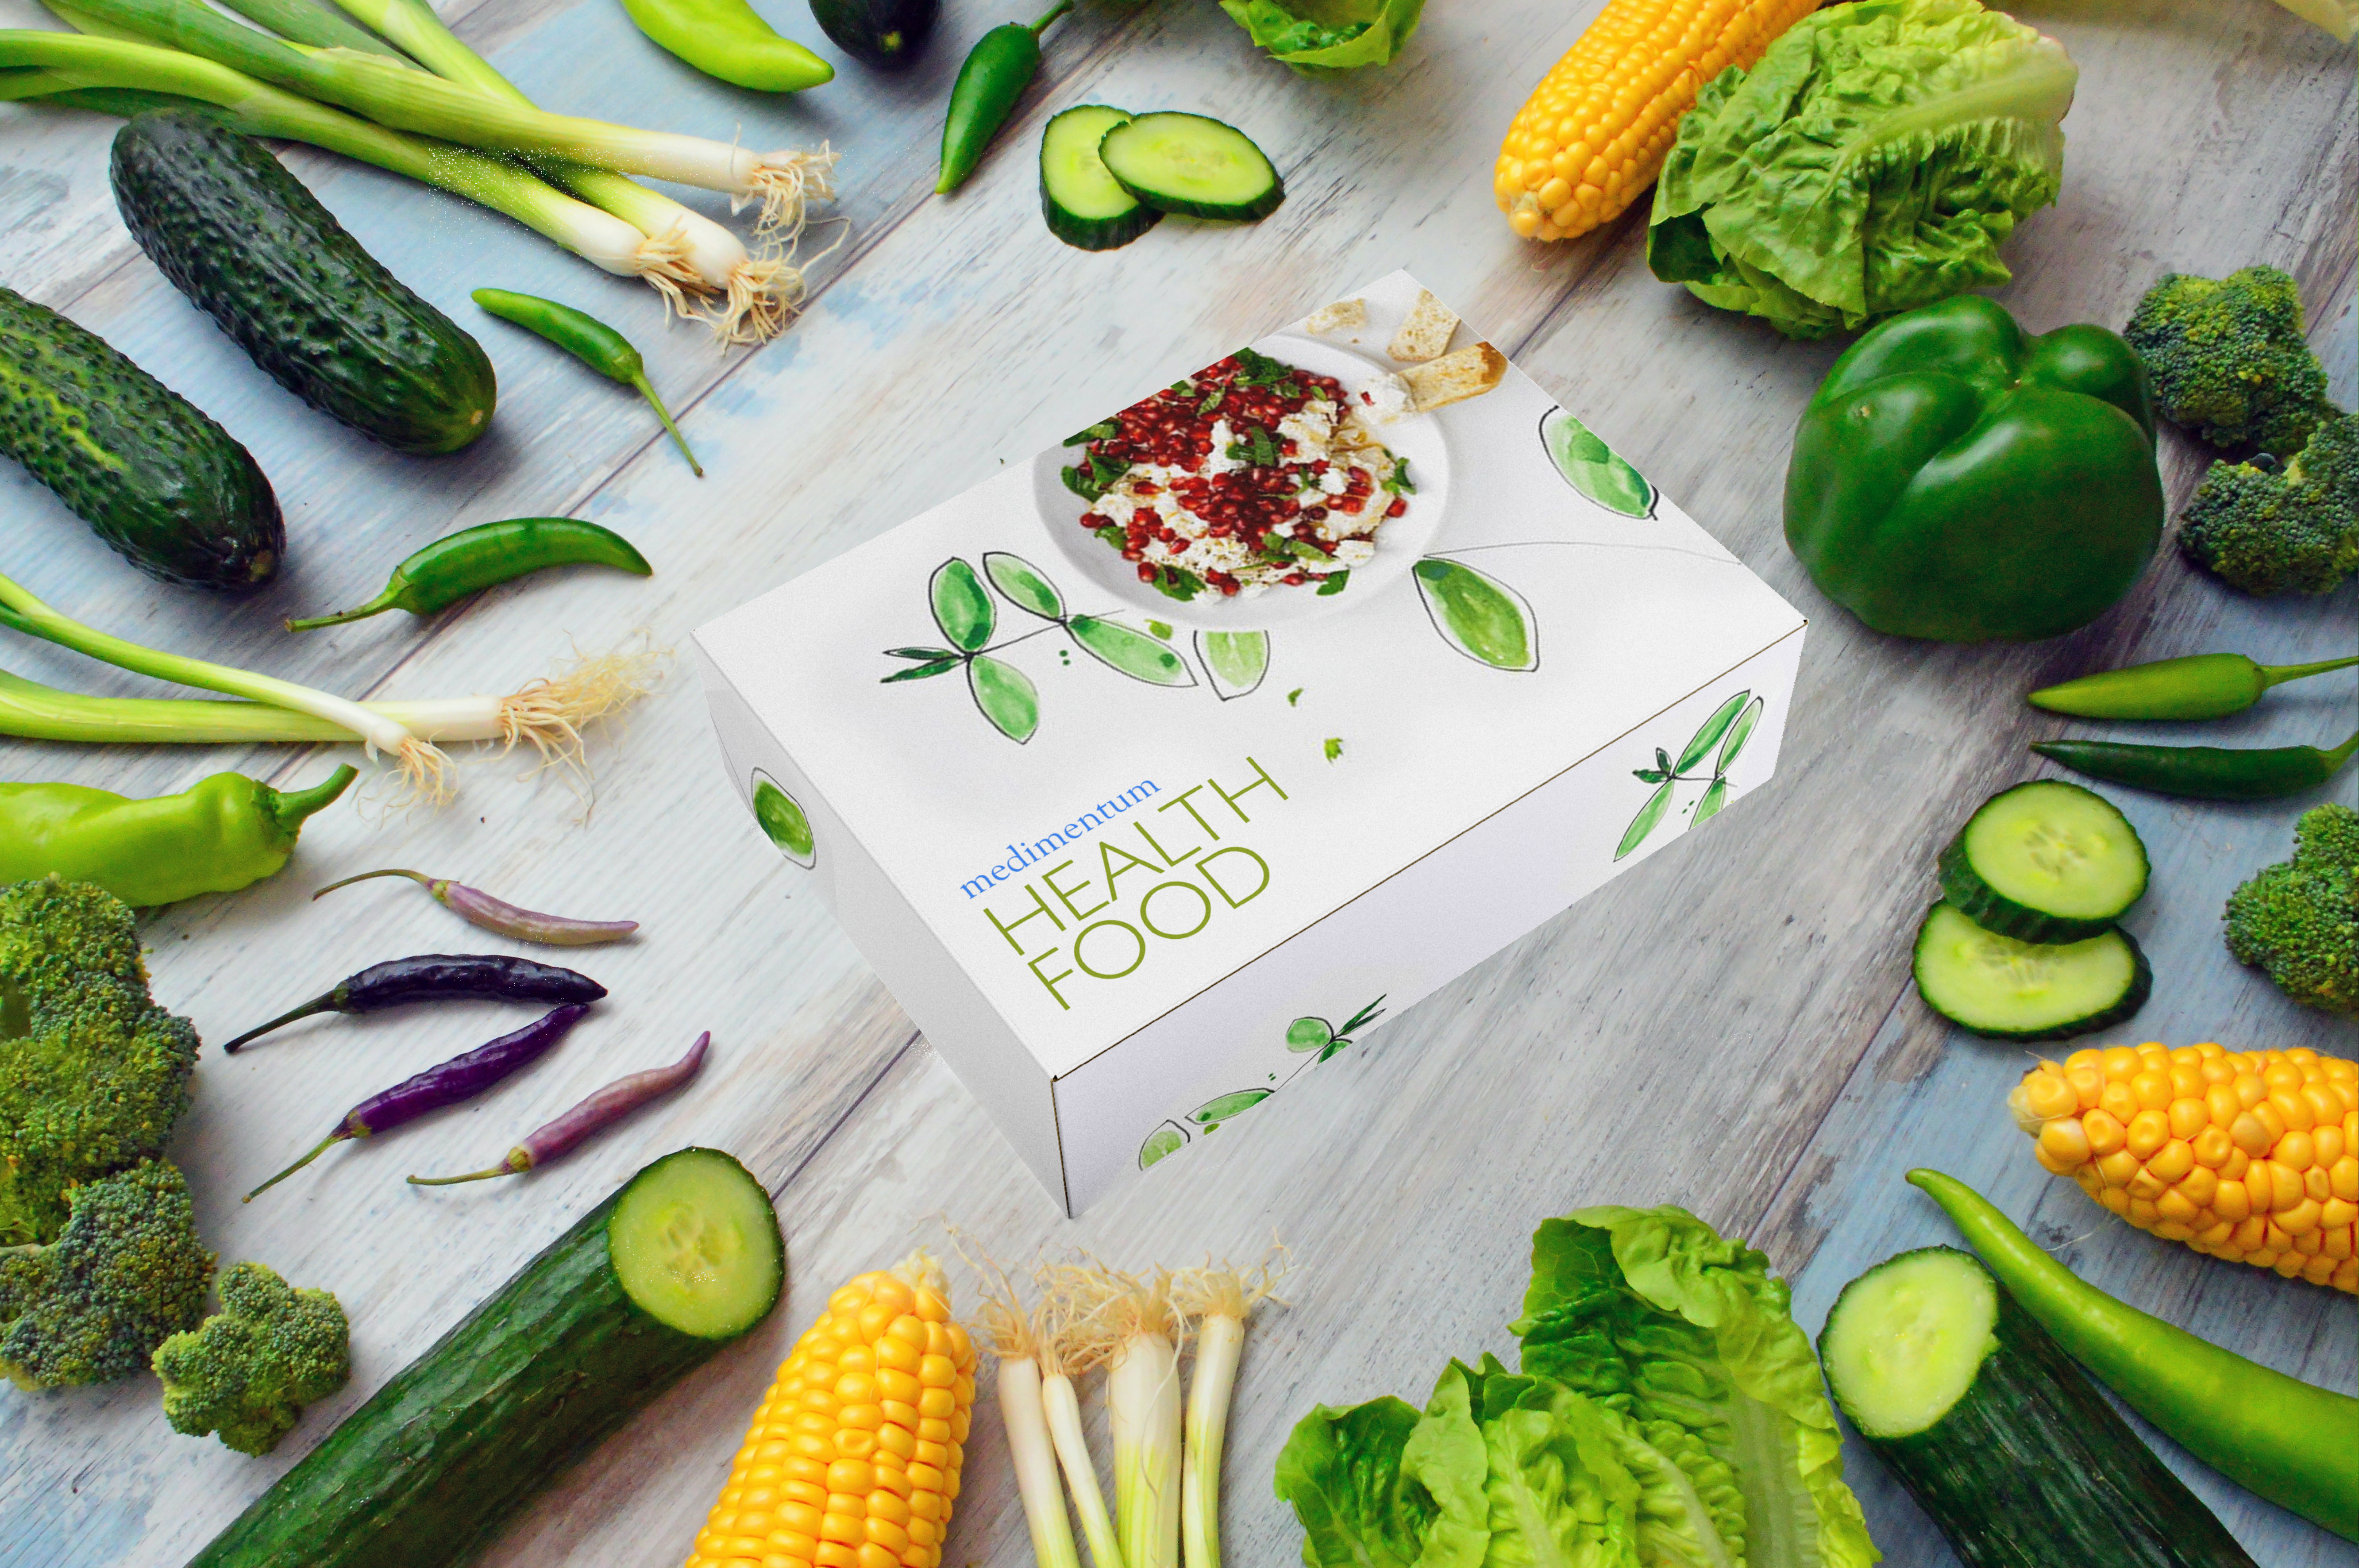 Food box from medimentumHealthFood.store between green vegetables on a wooden background.